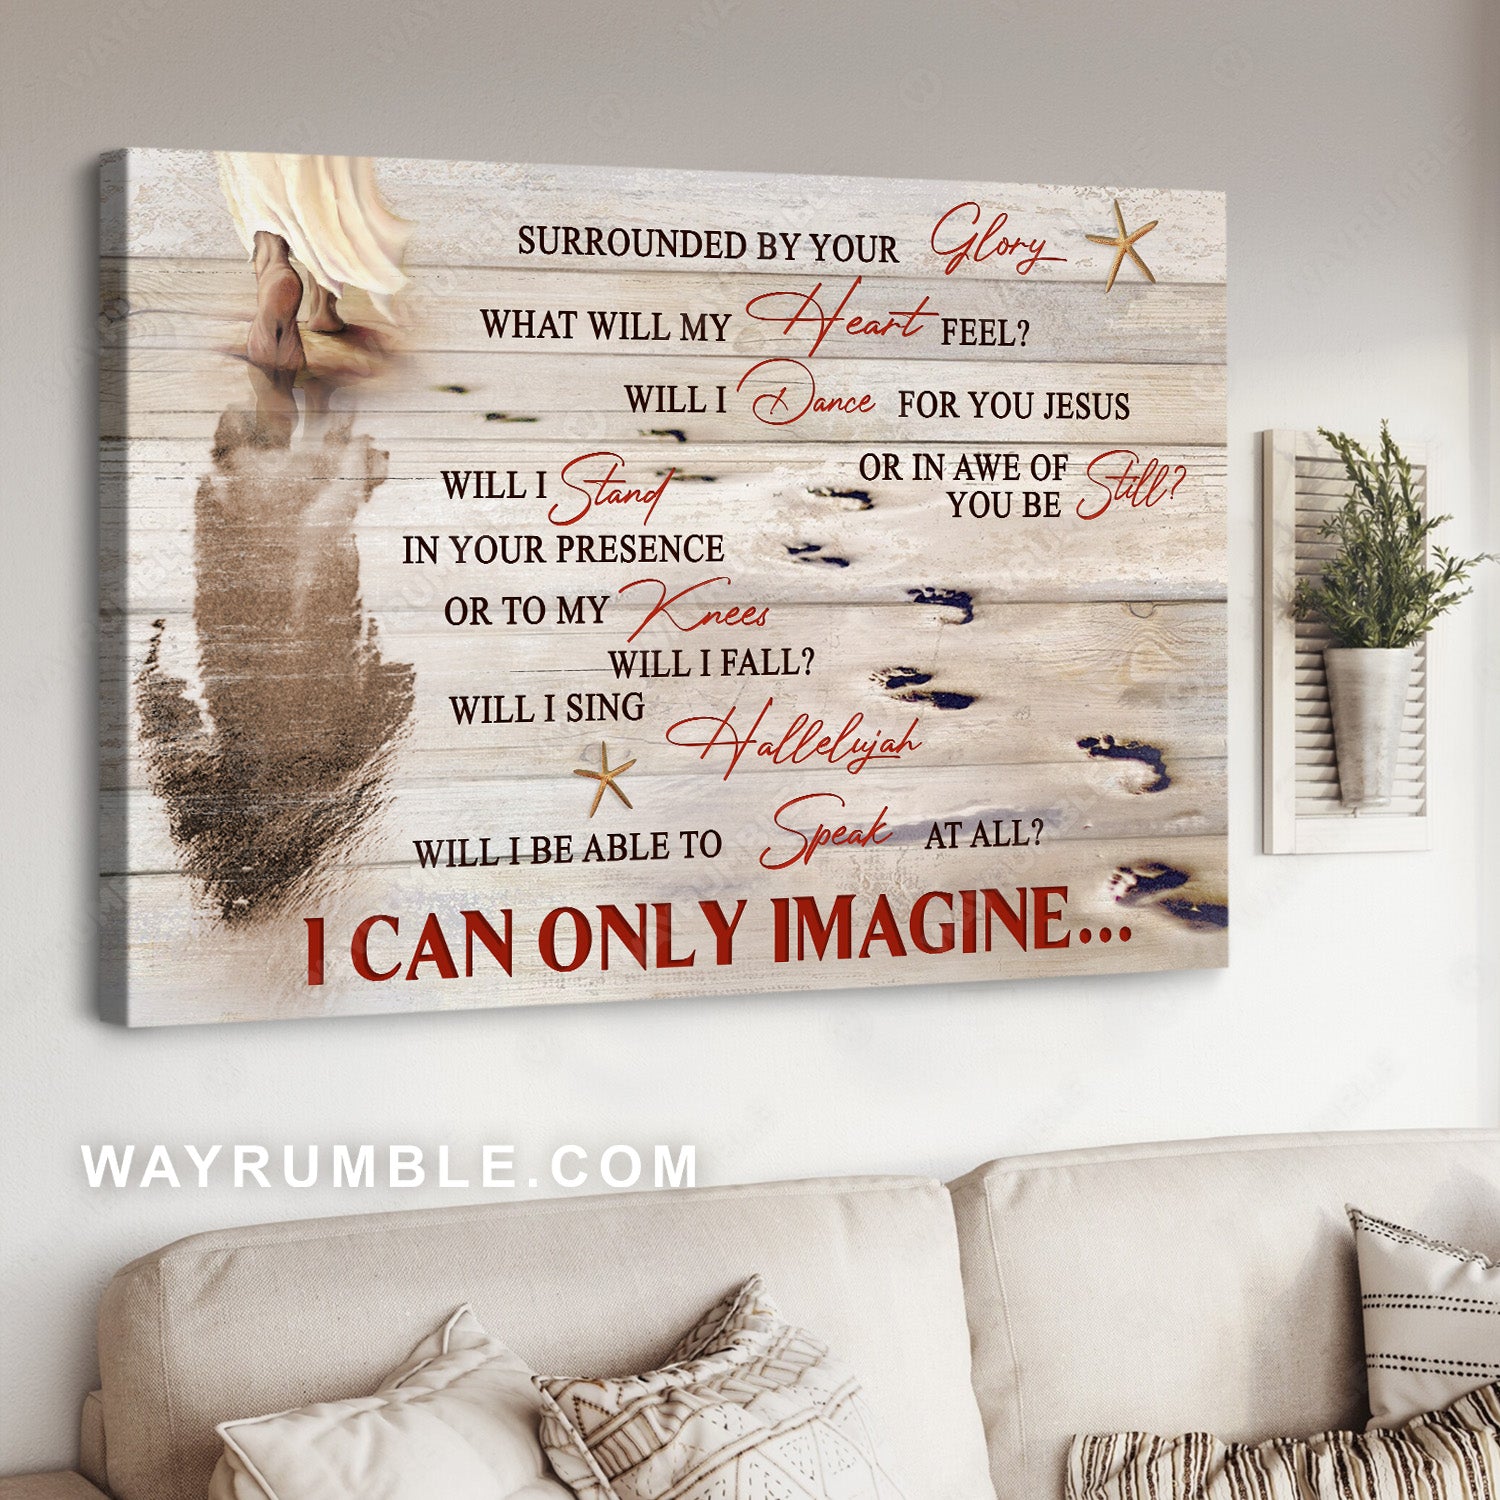 Walking with Jesus, Footprints on the beach, I can only imagine - Jesus Landscape Canvas Prints, Christian Wall Art